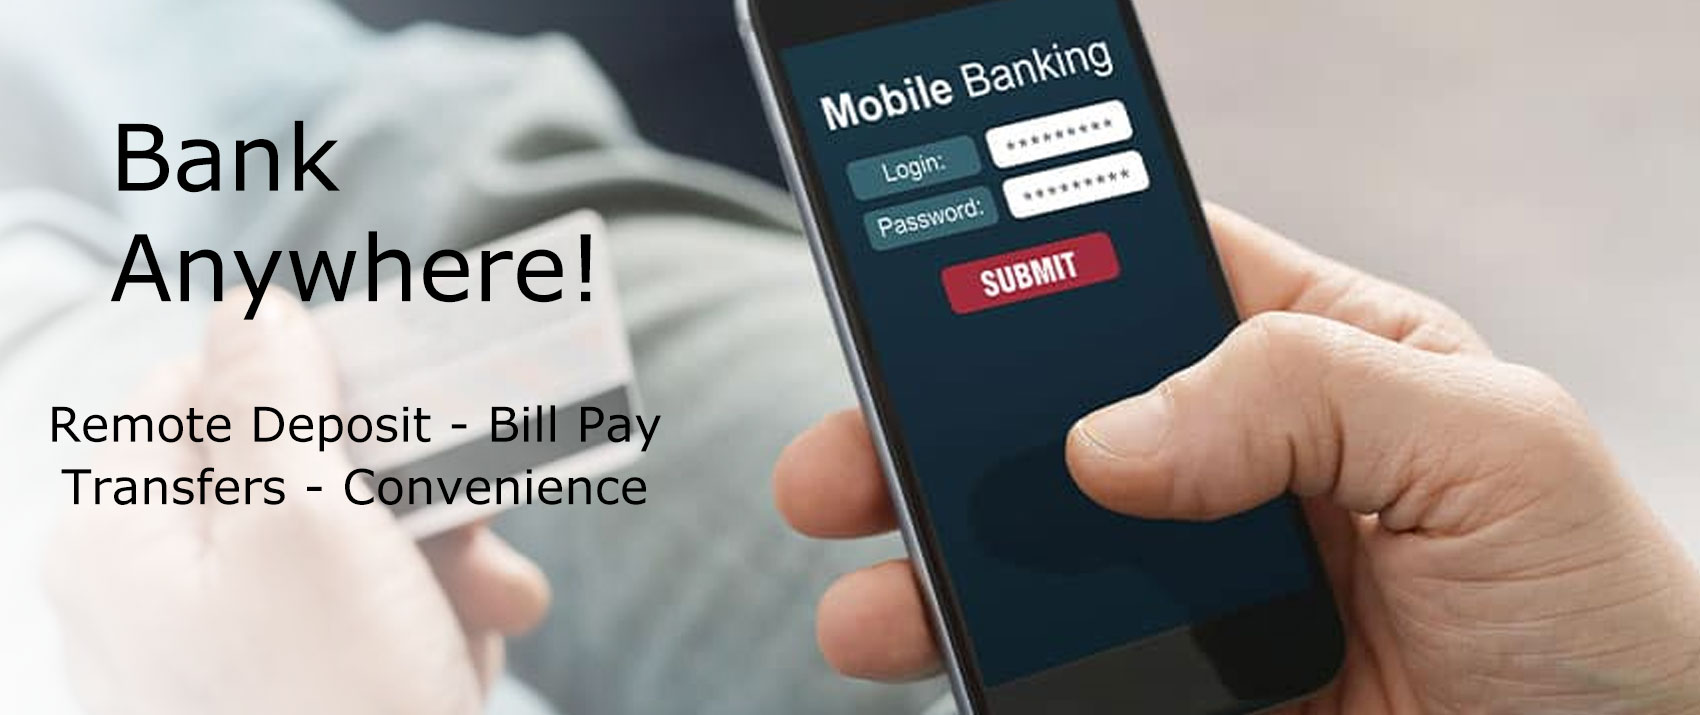 Bank Anywhere - remote deposit - bill pay - transfers - convenience